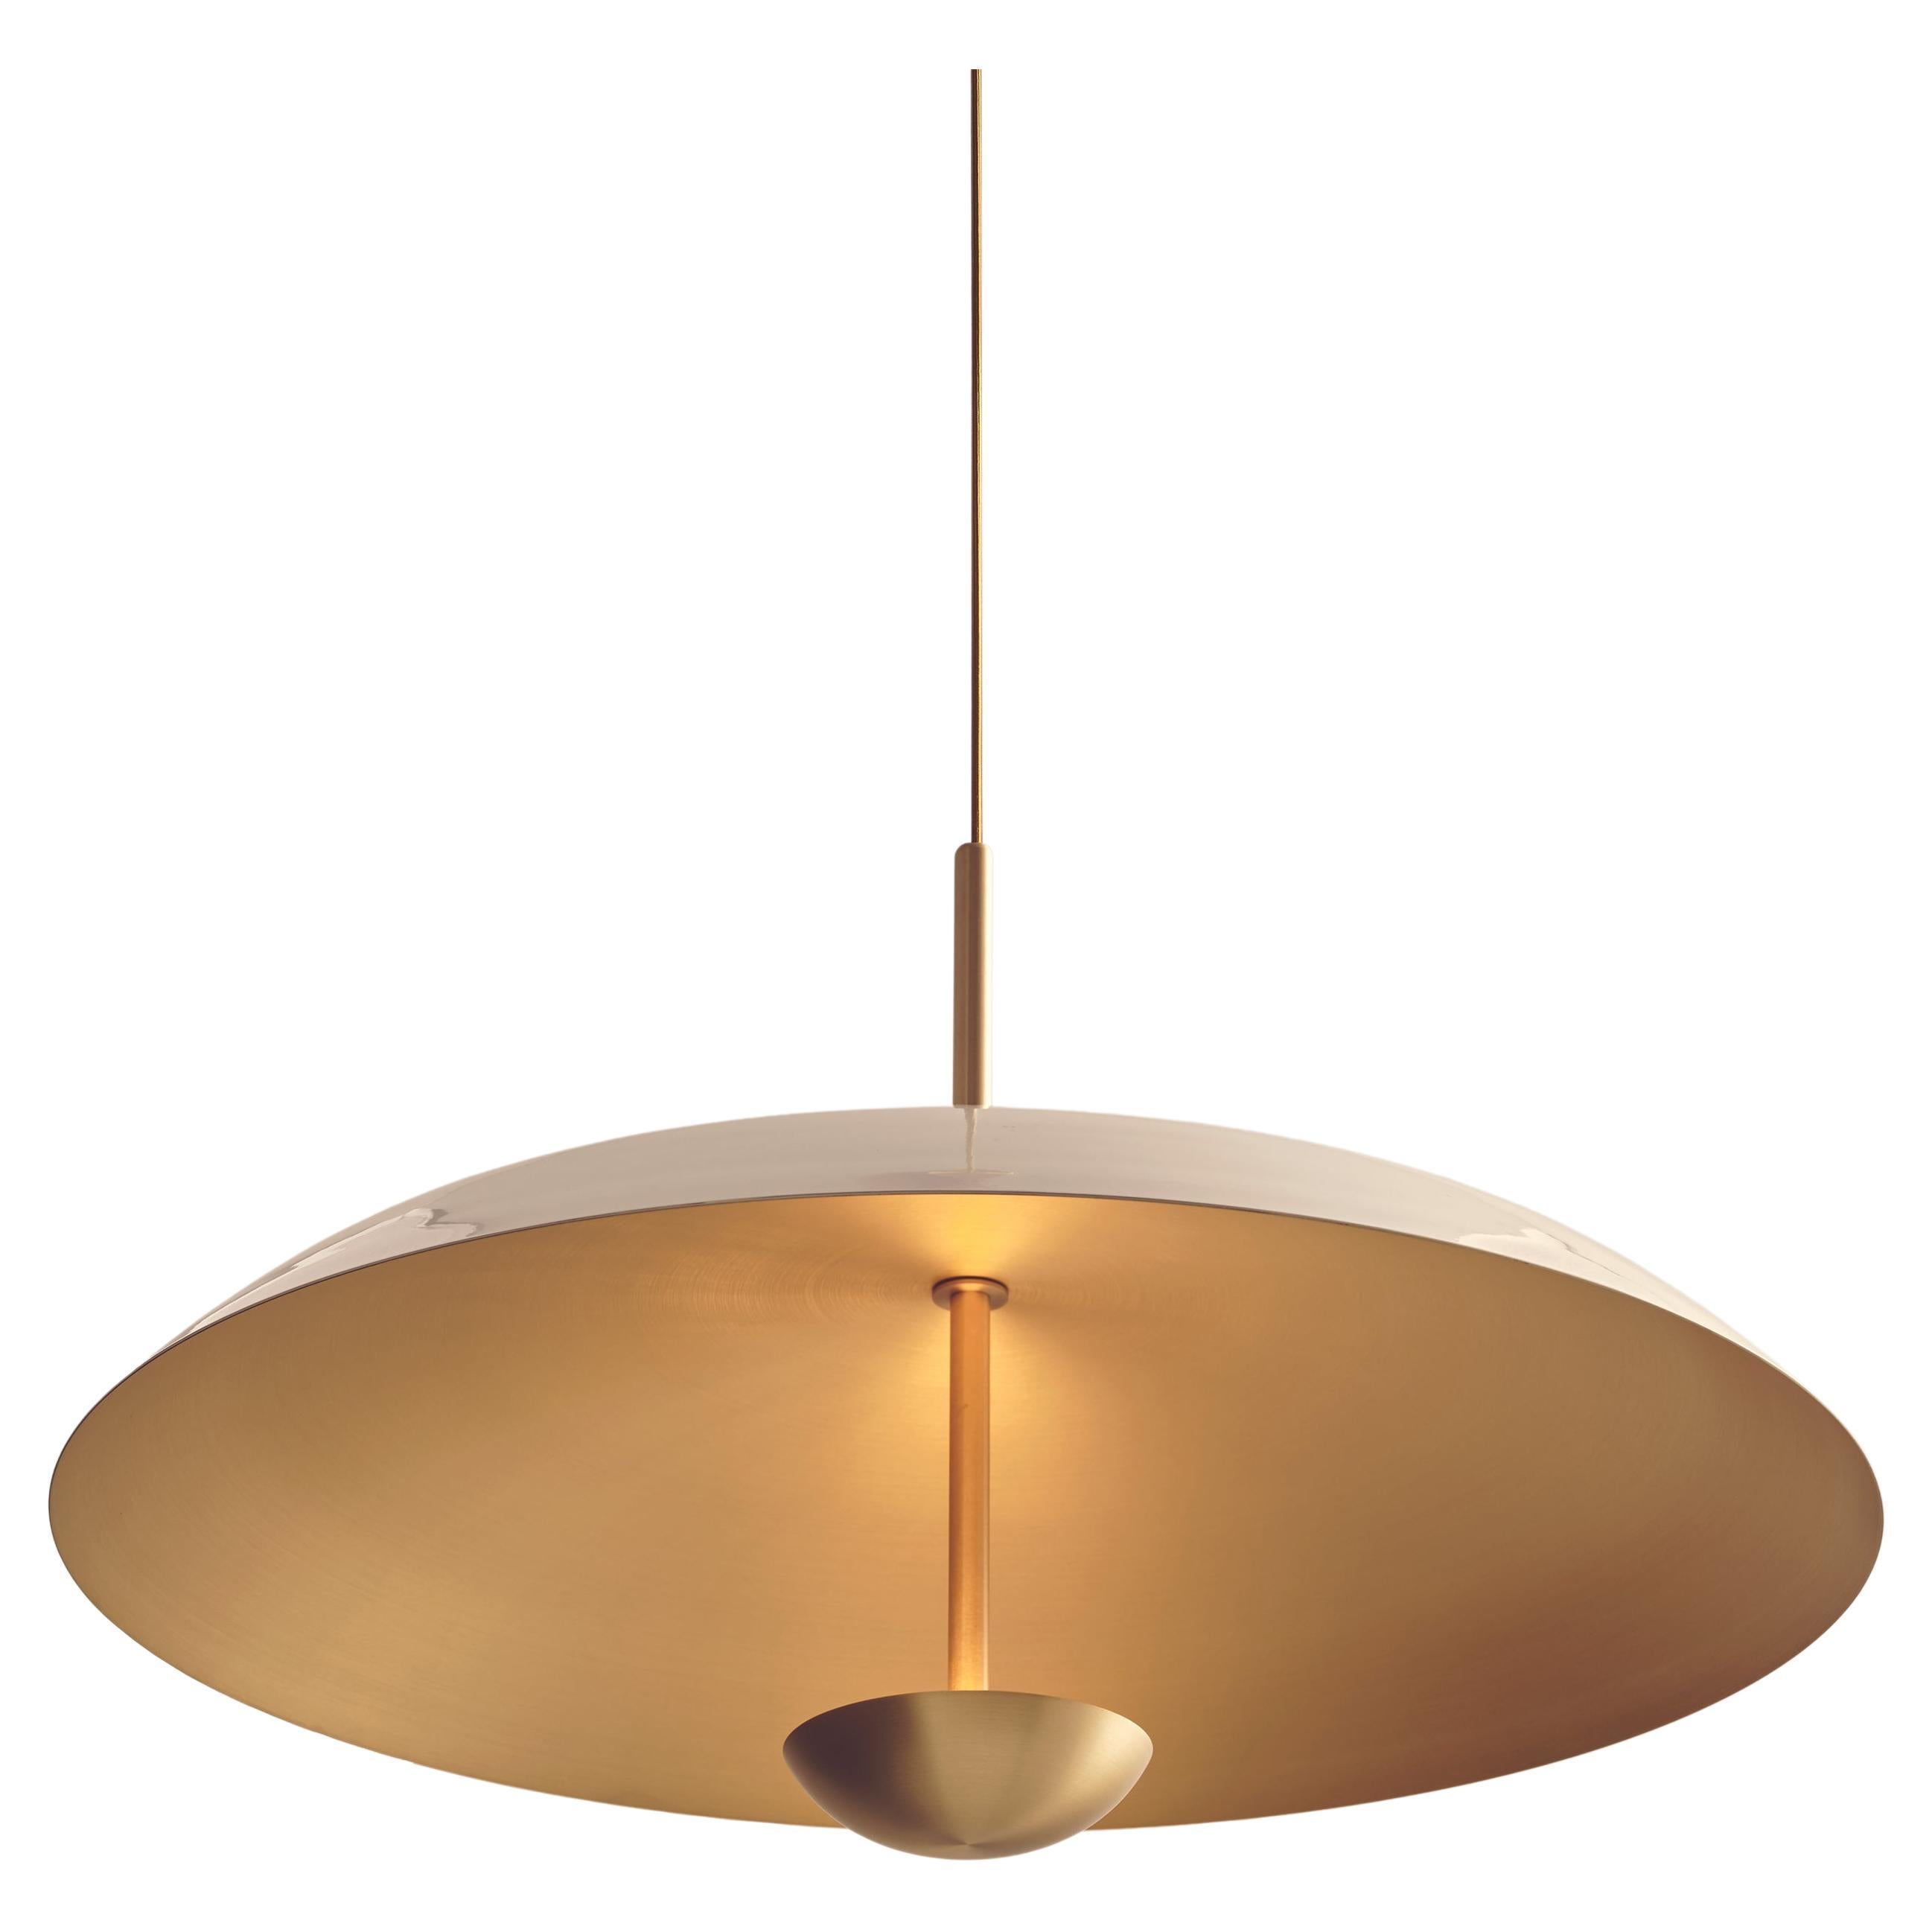 Cosmic 'Purion Pendant 70' White Piano Lacquered Satin Brass Ceiling Lamp